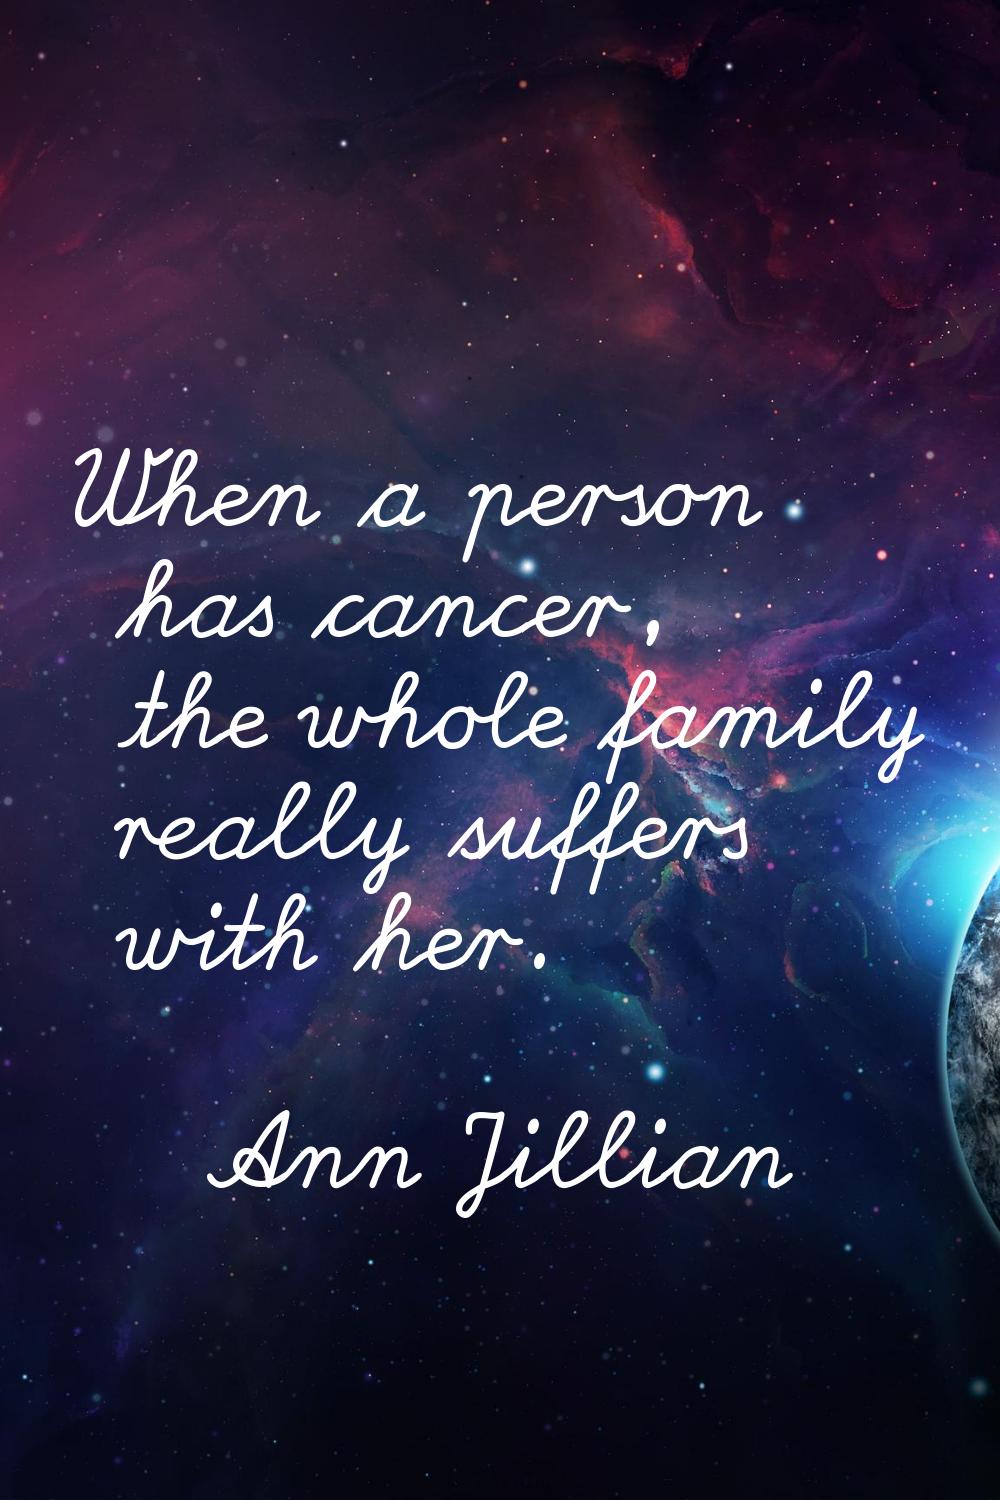 When a person has cancer, the whole family really suffers with her.